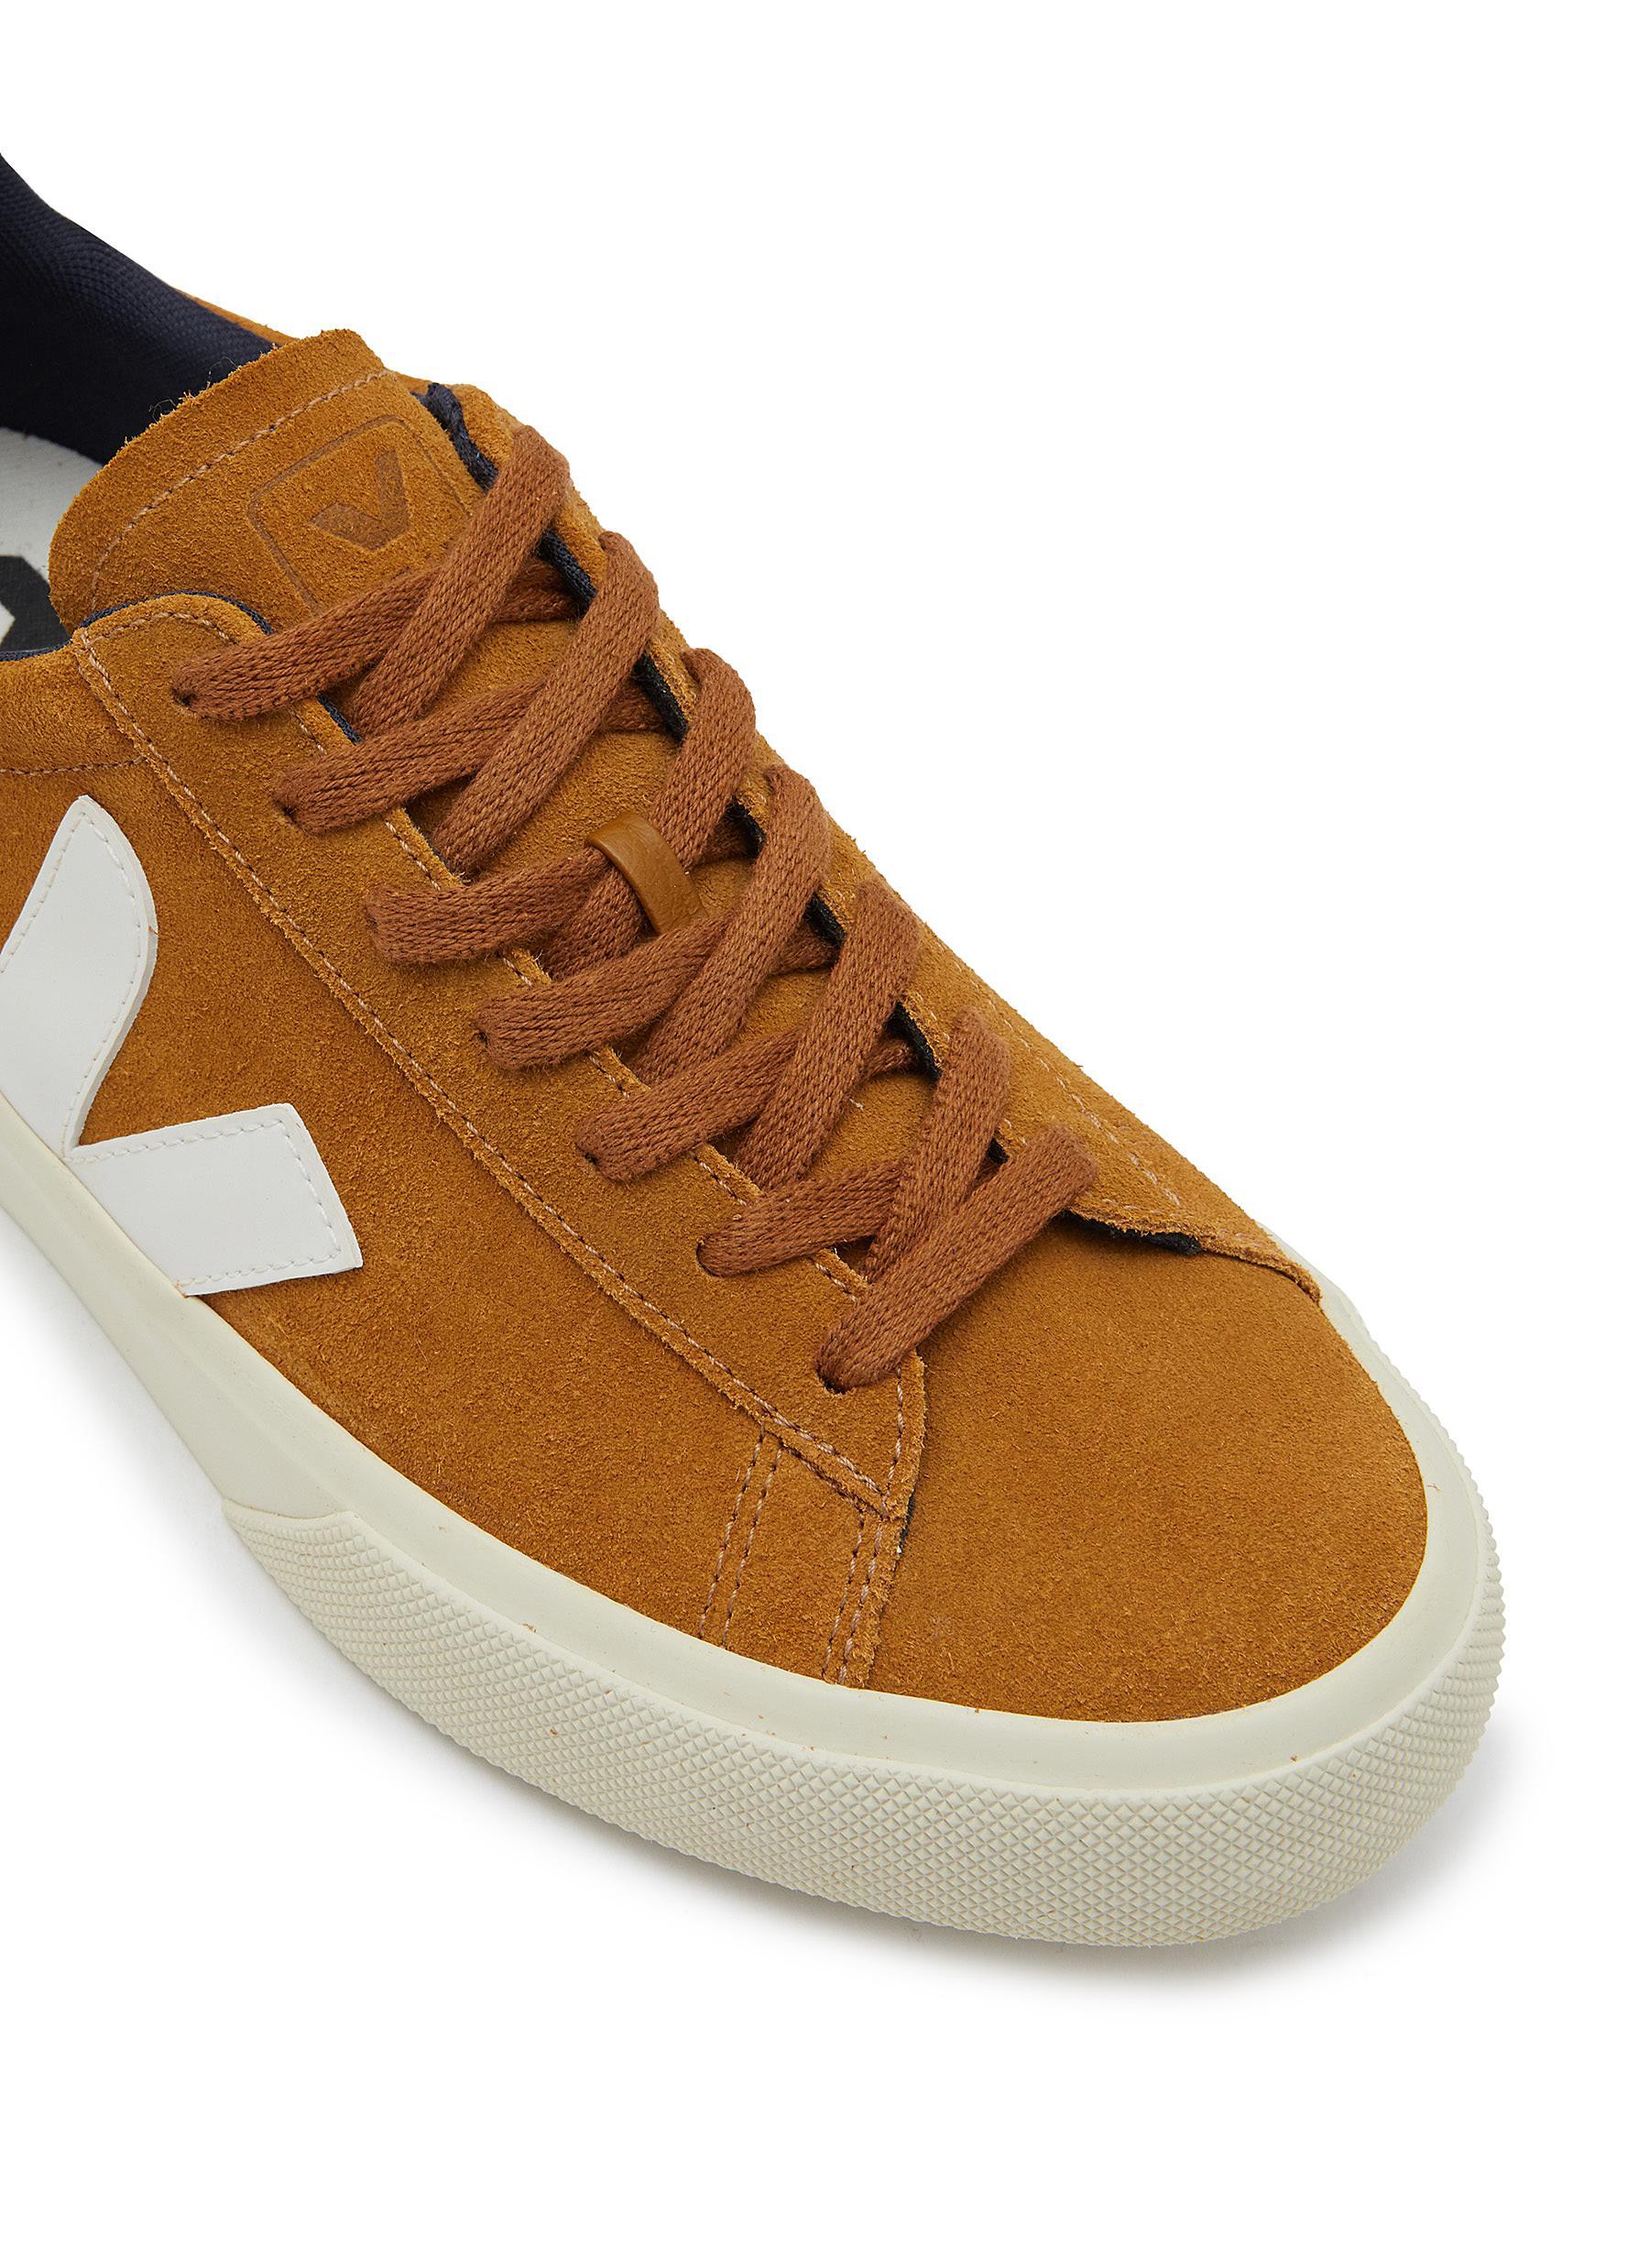 Veja 'campo' Suede Low Top Lace Up Sneakers in Brown for Men | Lyst